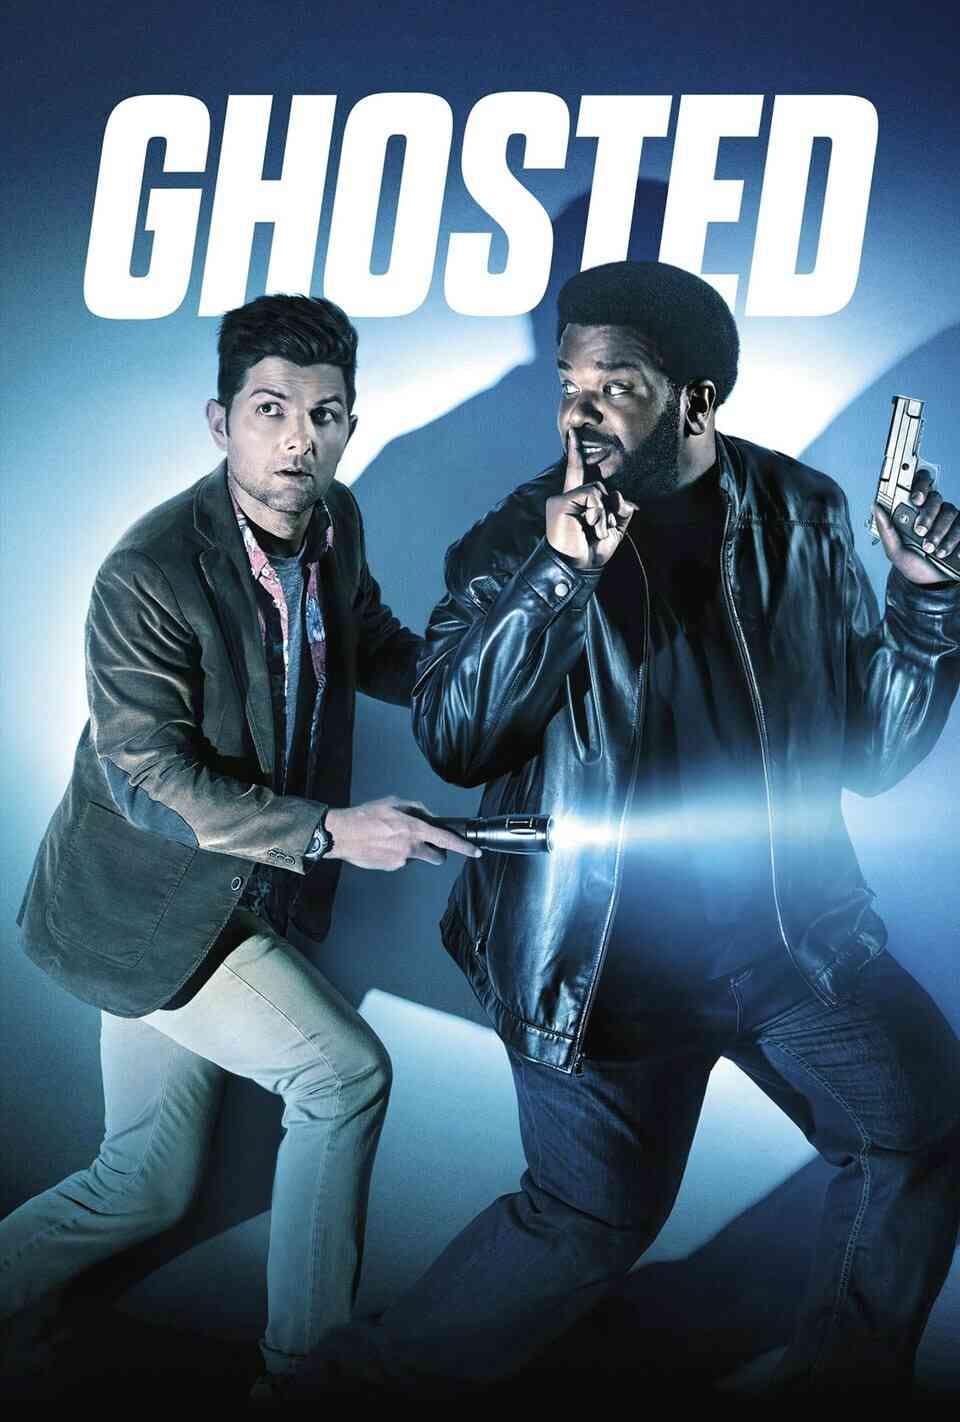 Read Ghosted screenplay (poster)